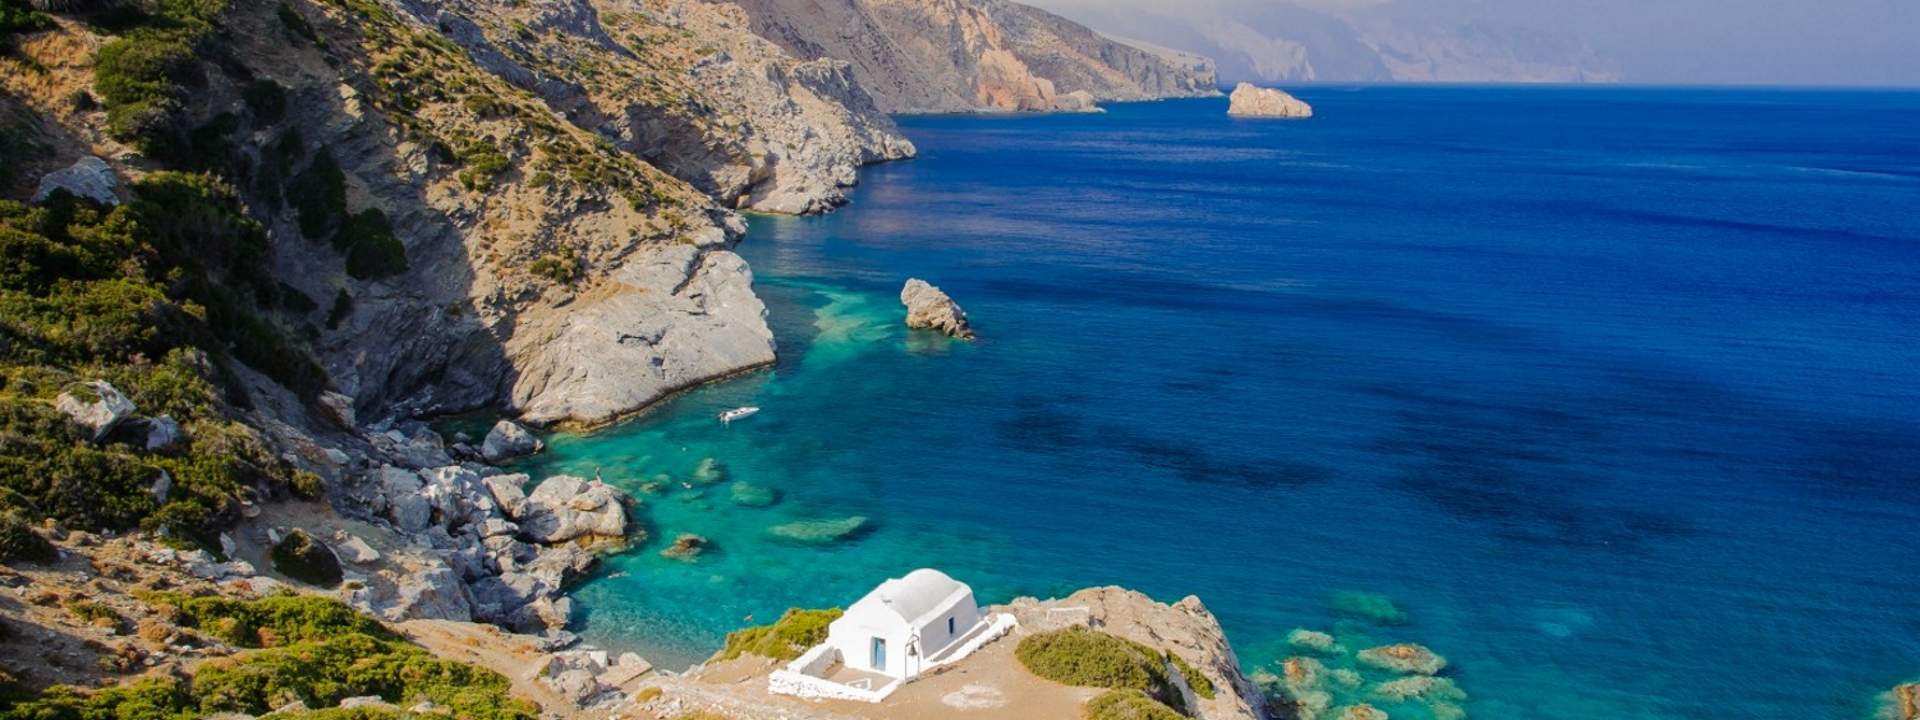 Explore the Greek Islands on a private charter or a cabin cruise